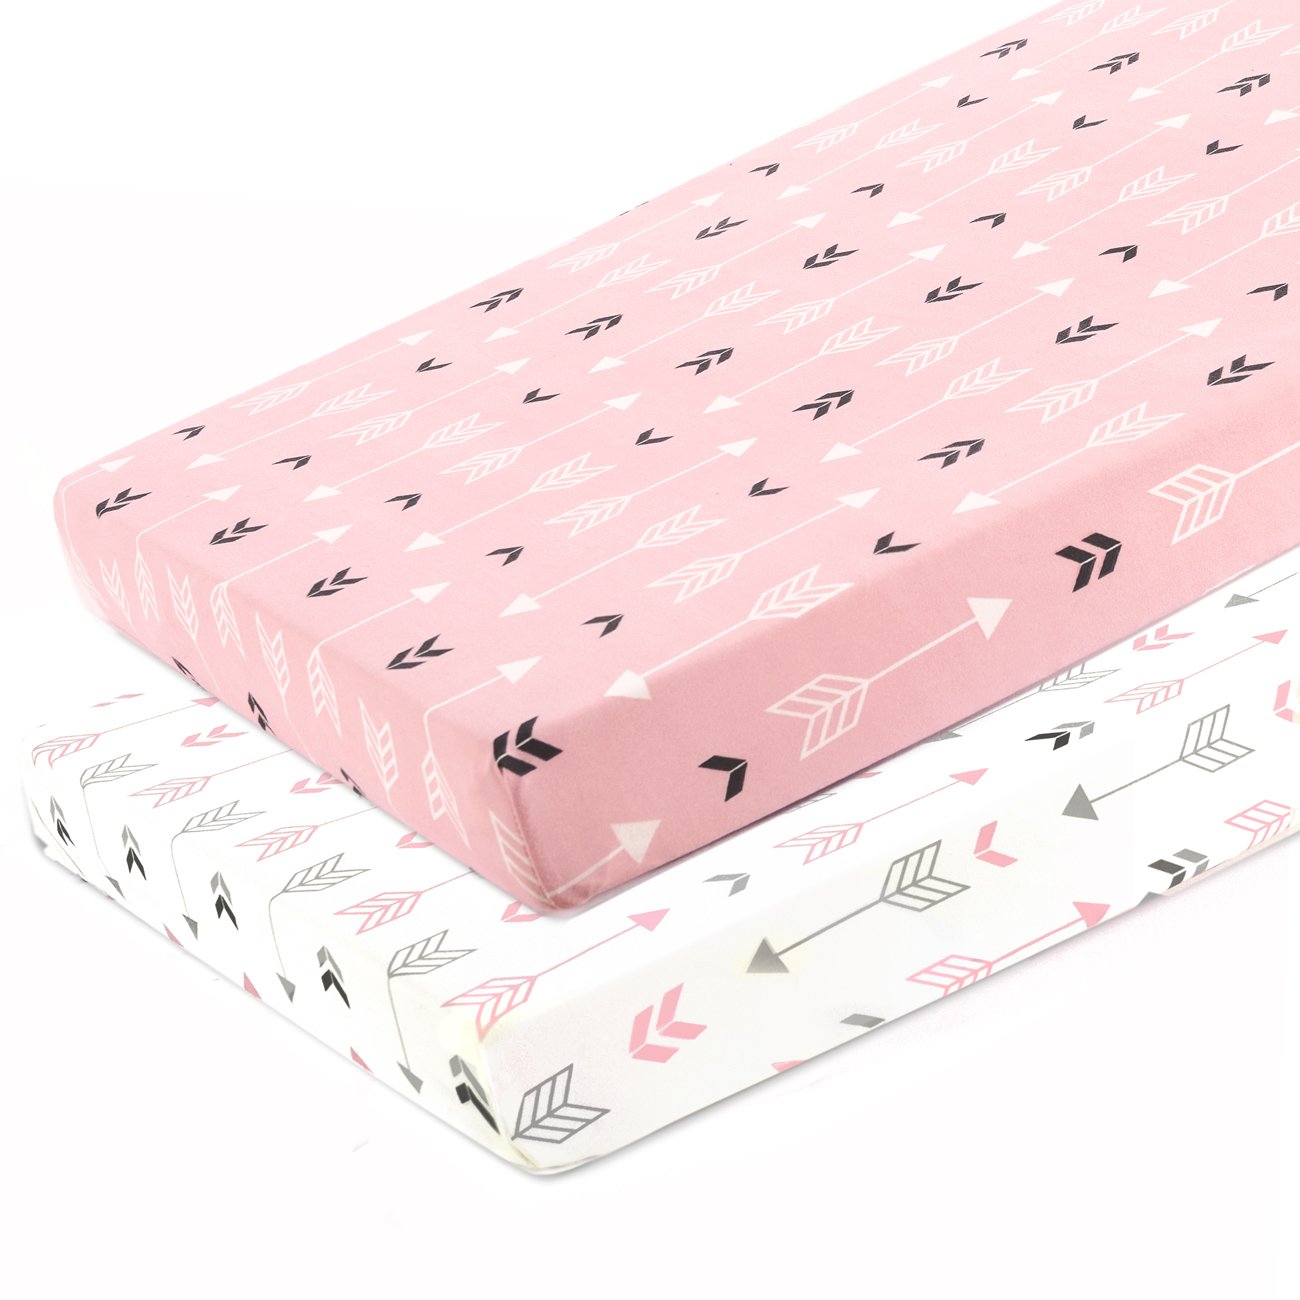 Stretchy Fitted Pack n Play Playard Sheet Set-Brolex 2 Pack Portable Mini Crib Sheets,Convertible Playard Mattress Cover,Ultra Soft Material,Pink & White Arrow Design - image 2 of 2